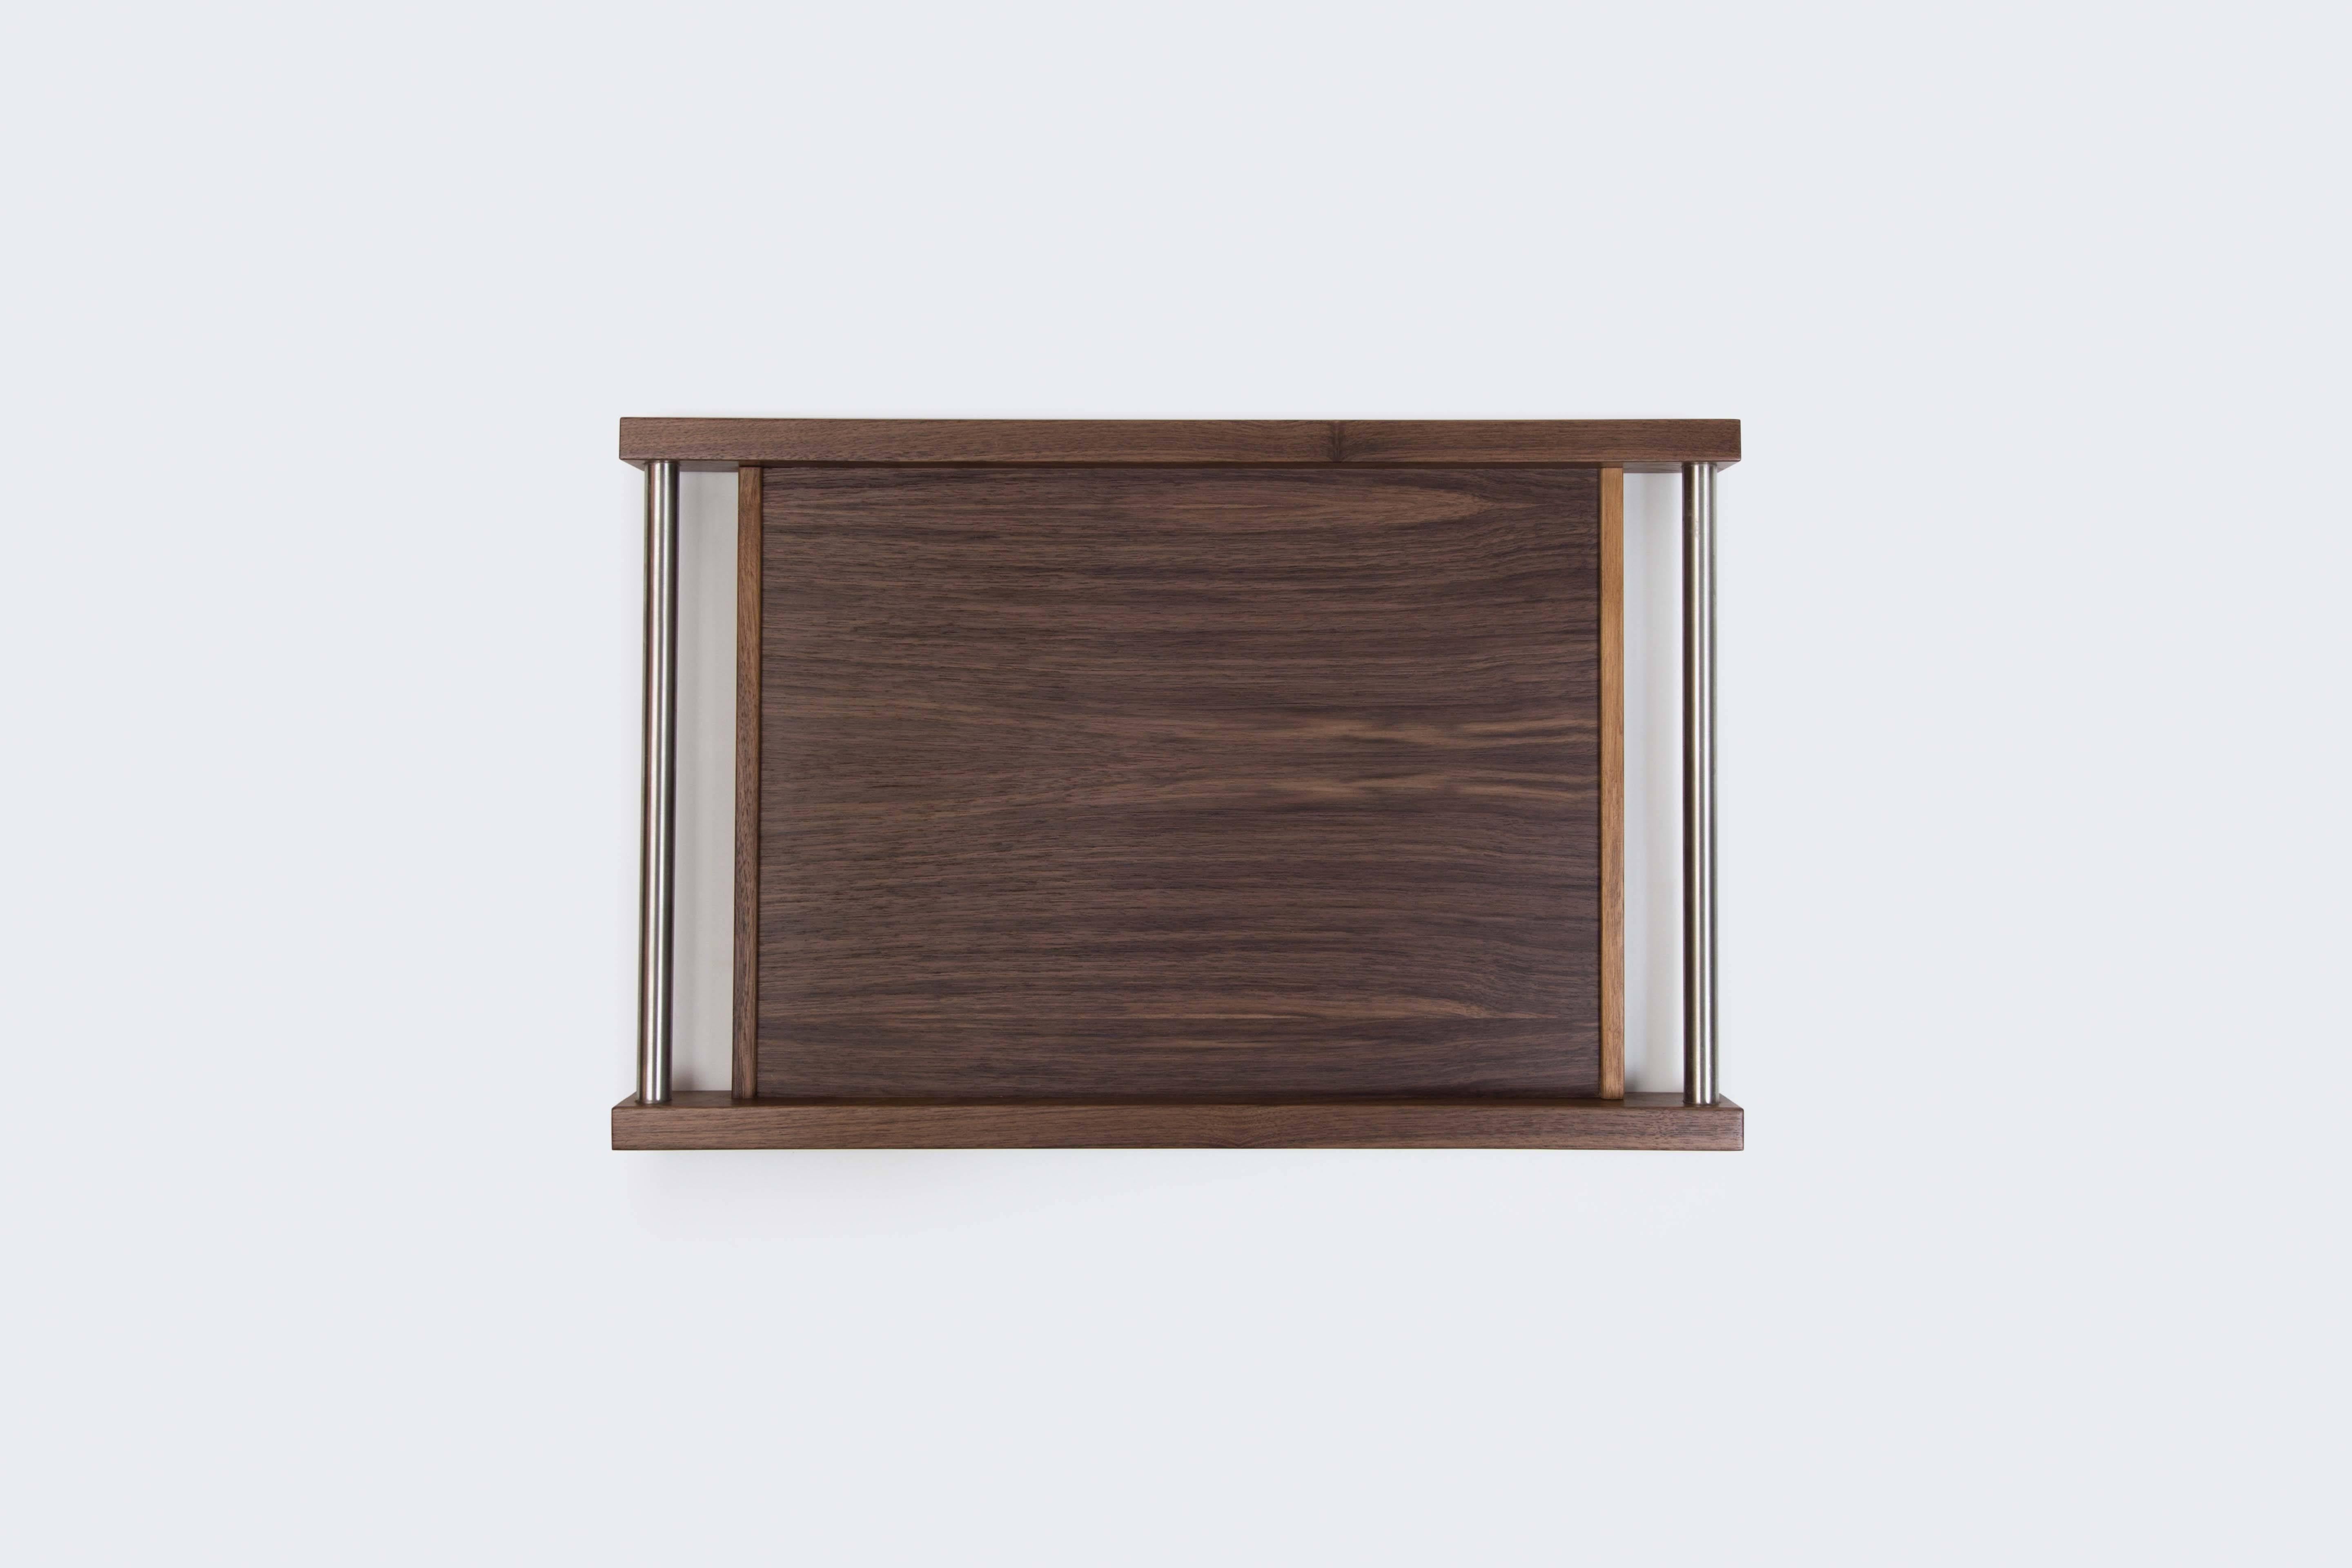 Canadian Black Walnut Serving Tray by Kate Duncan